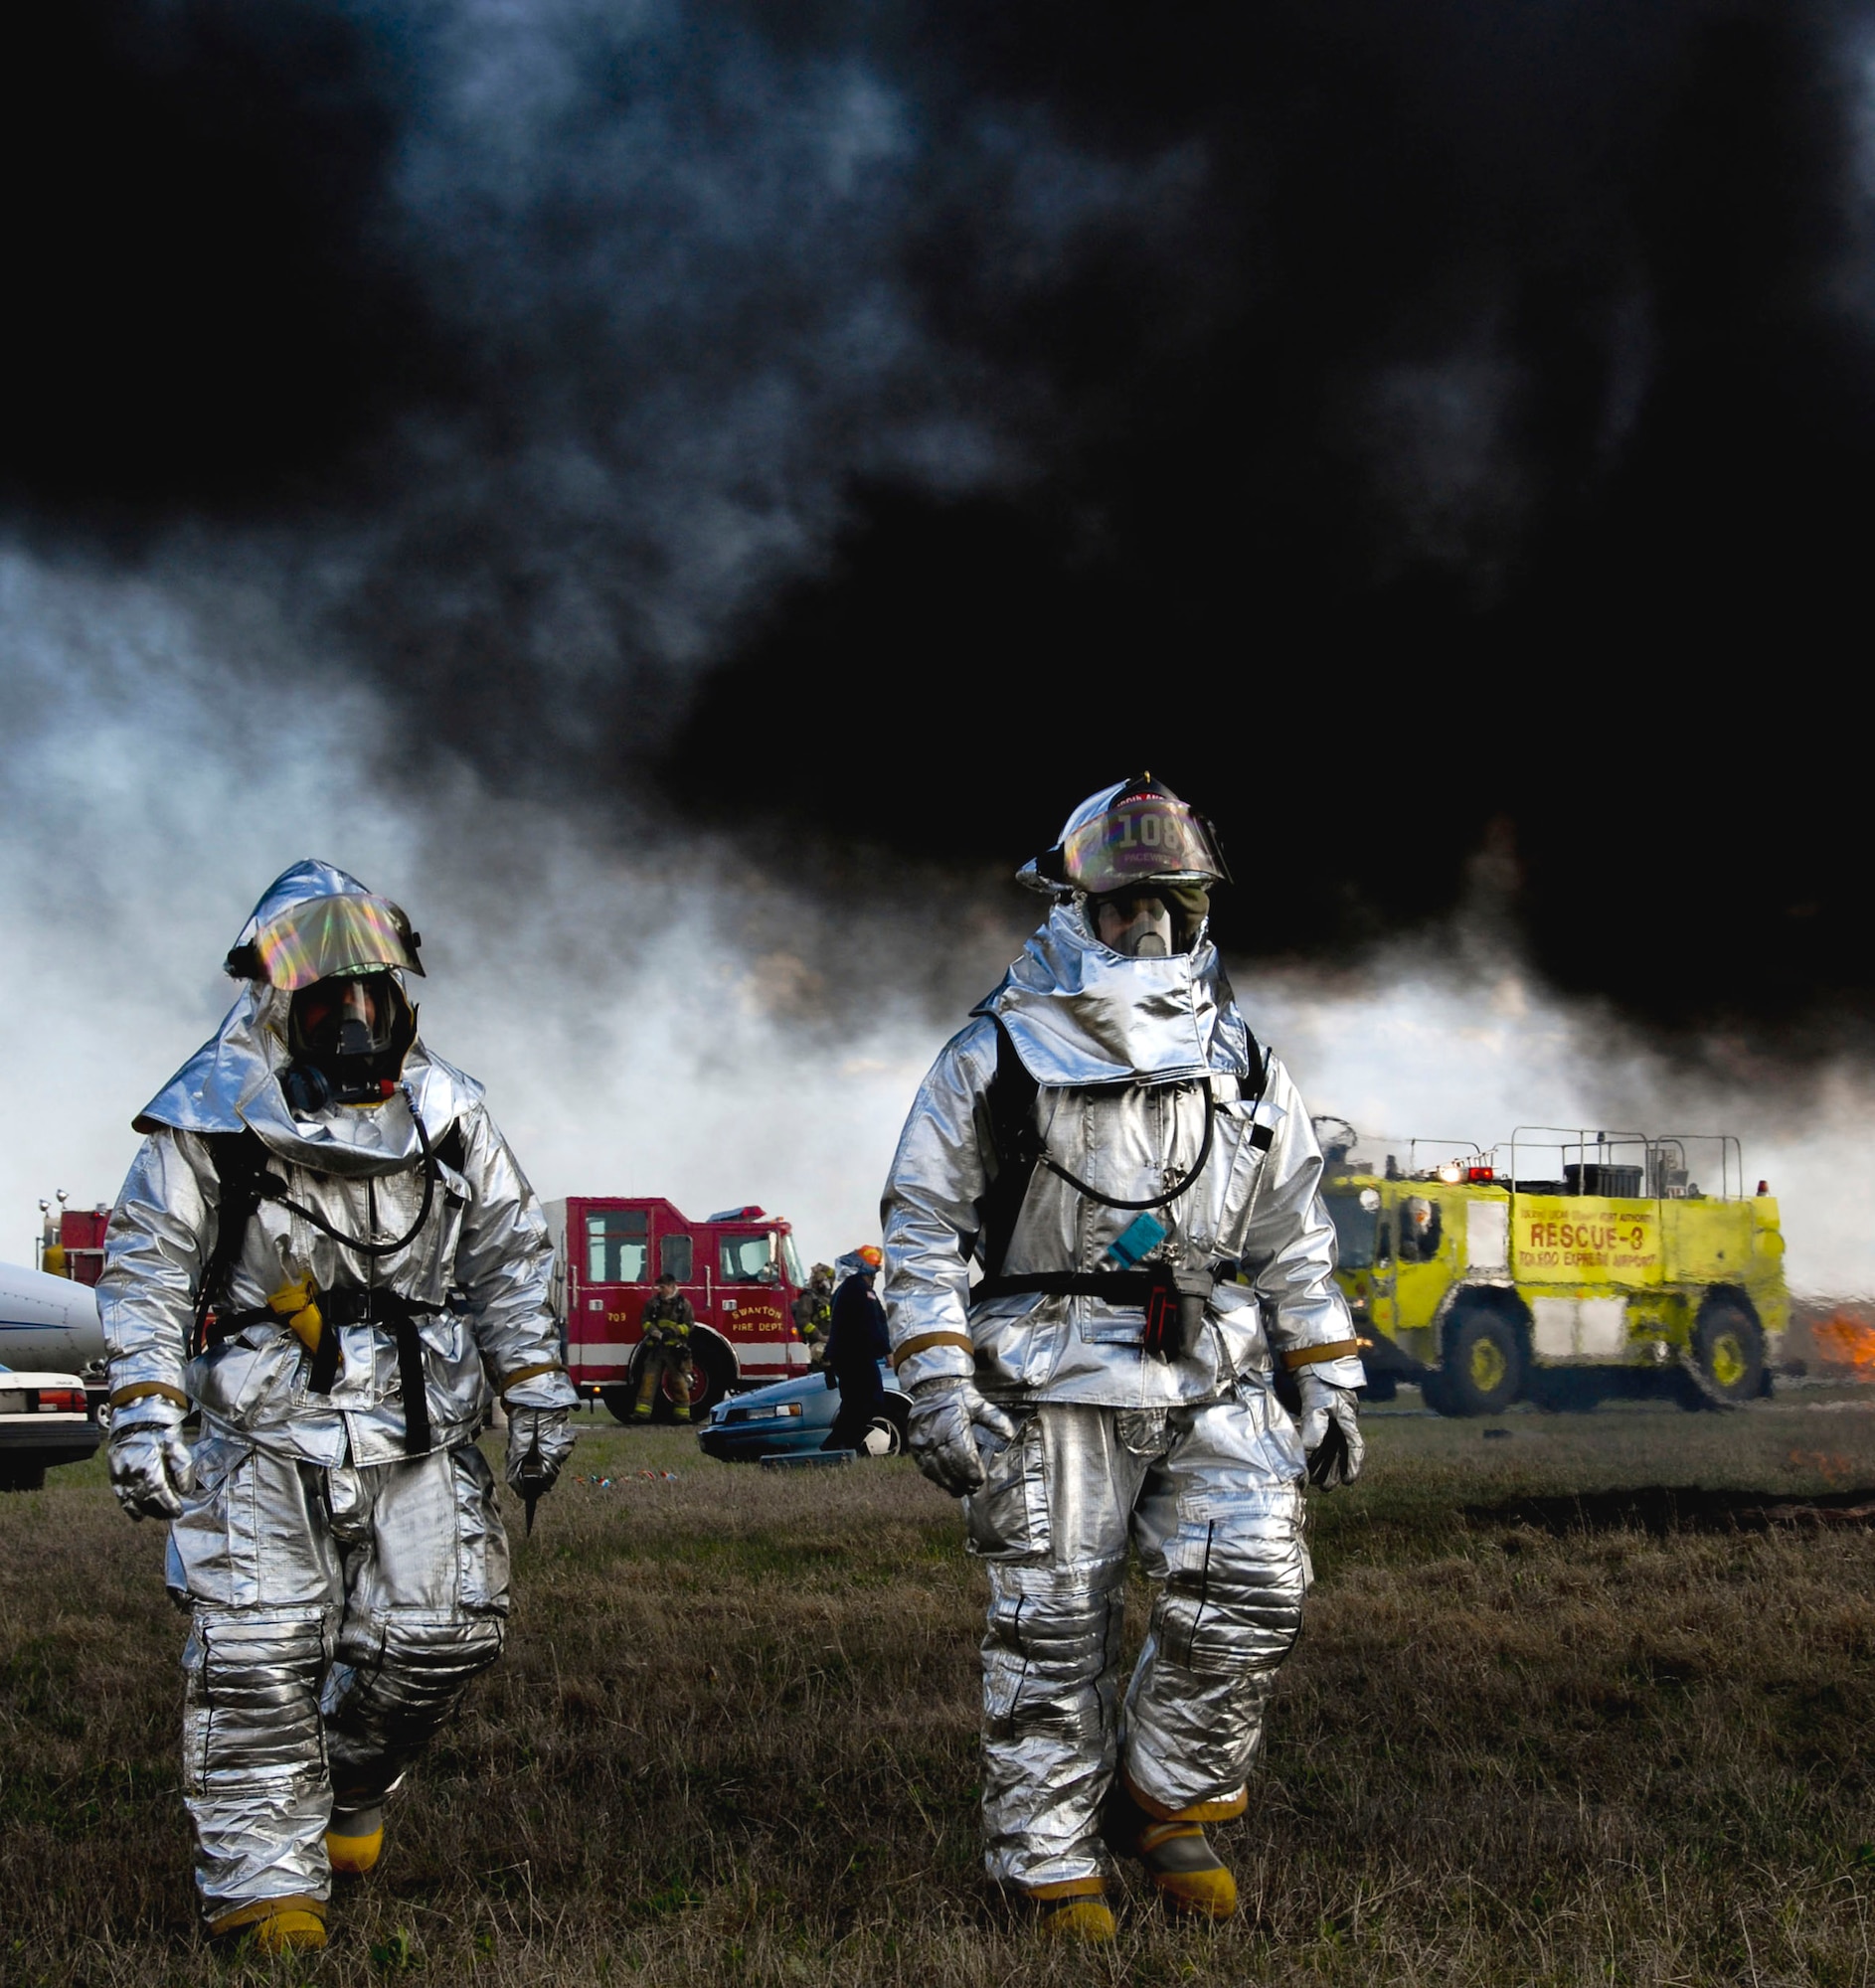 Two firefighters from the Ohio Air National Guard's 180th Fighter Wing fire department participate in an aircraft crash and recovery exercise April 22 at the Toledo Express Airport.  The drill tests the response of local emergency, fire and rescue crews that normally would respond to such an incident.  (U.S. Air Force photo/Tech. Sgt. Beth Holliker)